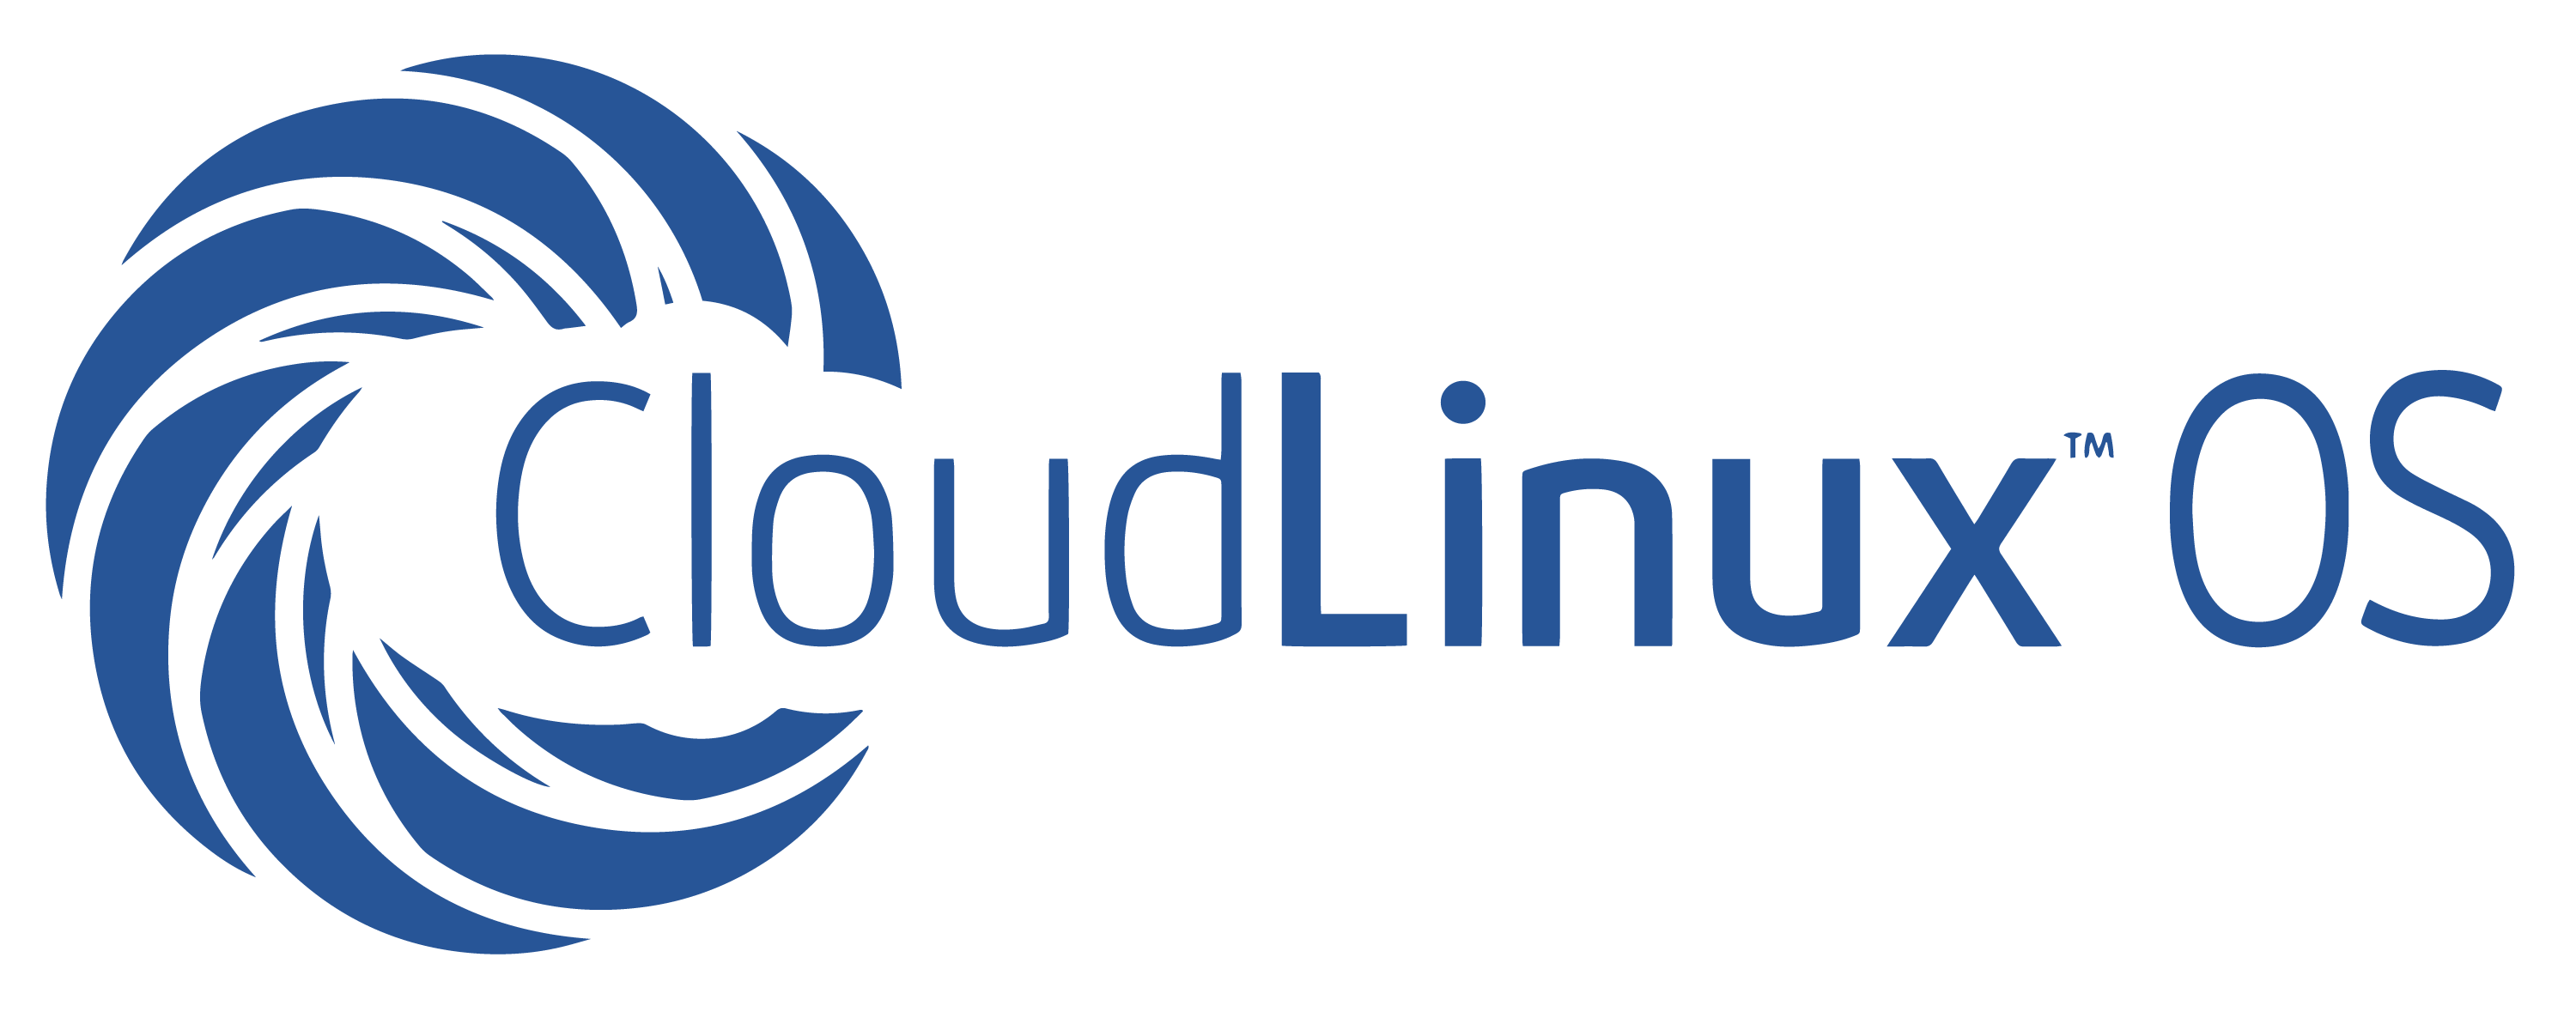 Linux distribution for shared hosting - Interview with the CEO of CloudLinux